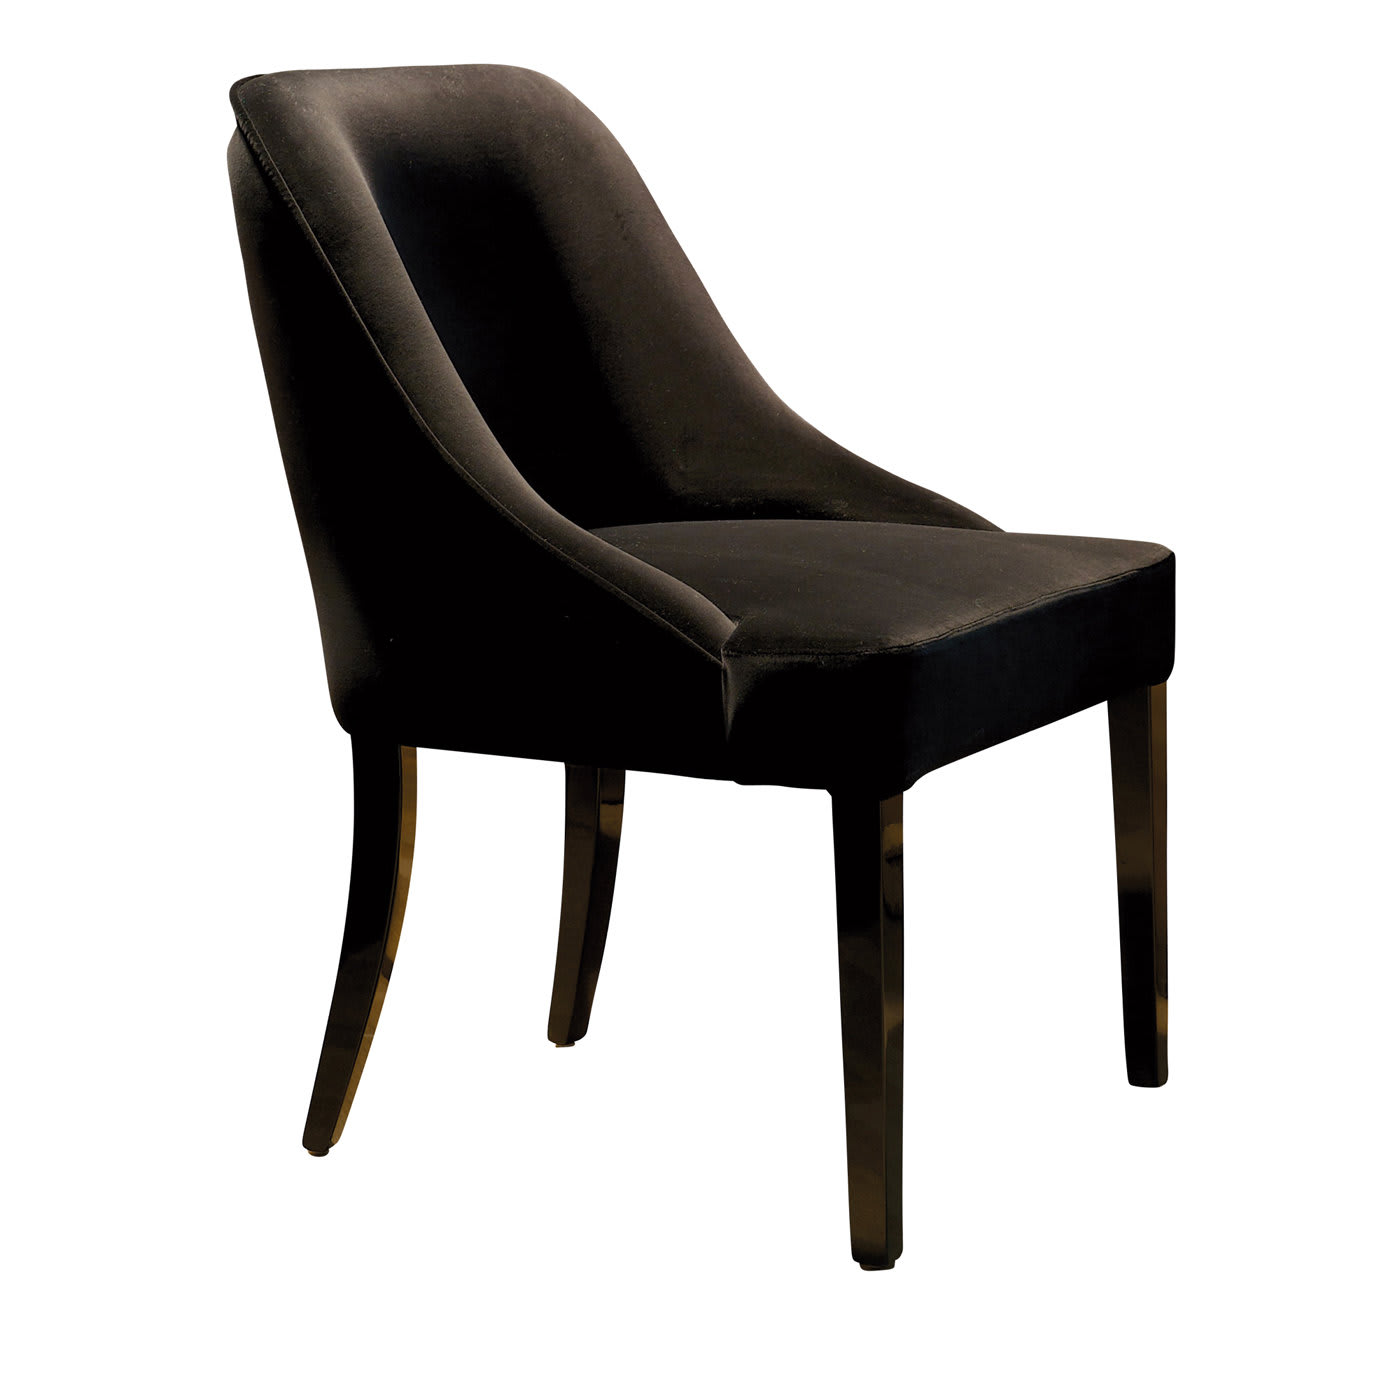 Vicky Gray Dining Chair - DOM Edizioni